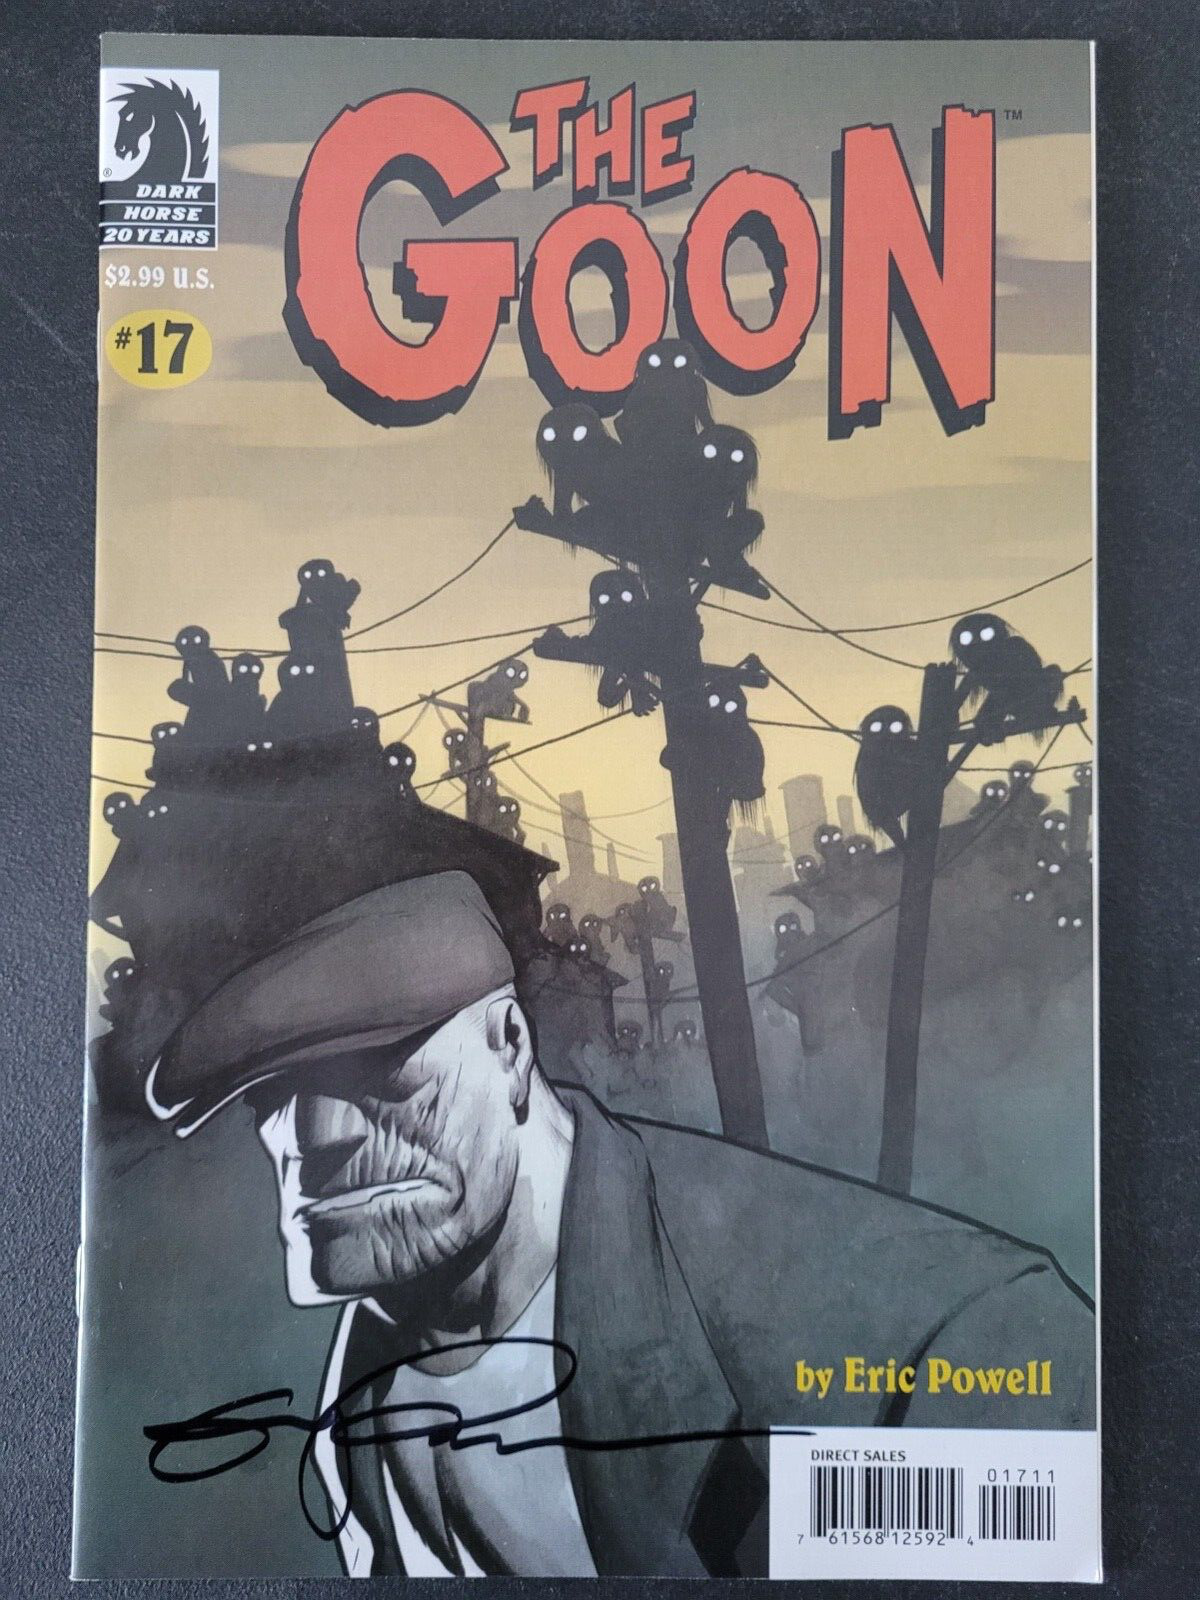 THE GOON #17 (2006) DARK HORSE COMICS AUTOGRAPHED/SIGNED By ERIC POWELL